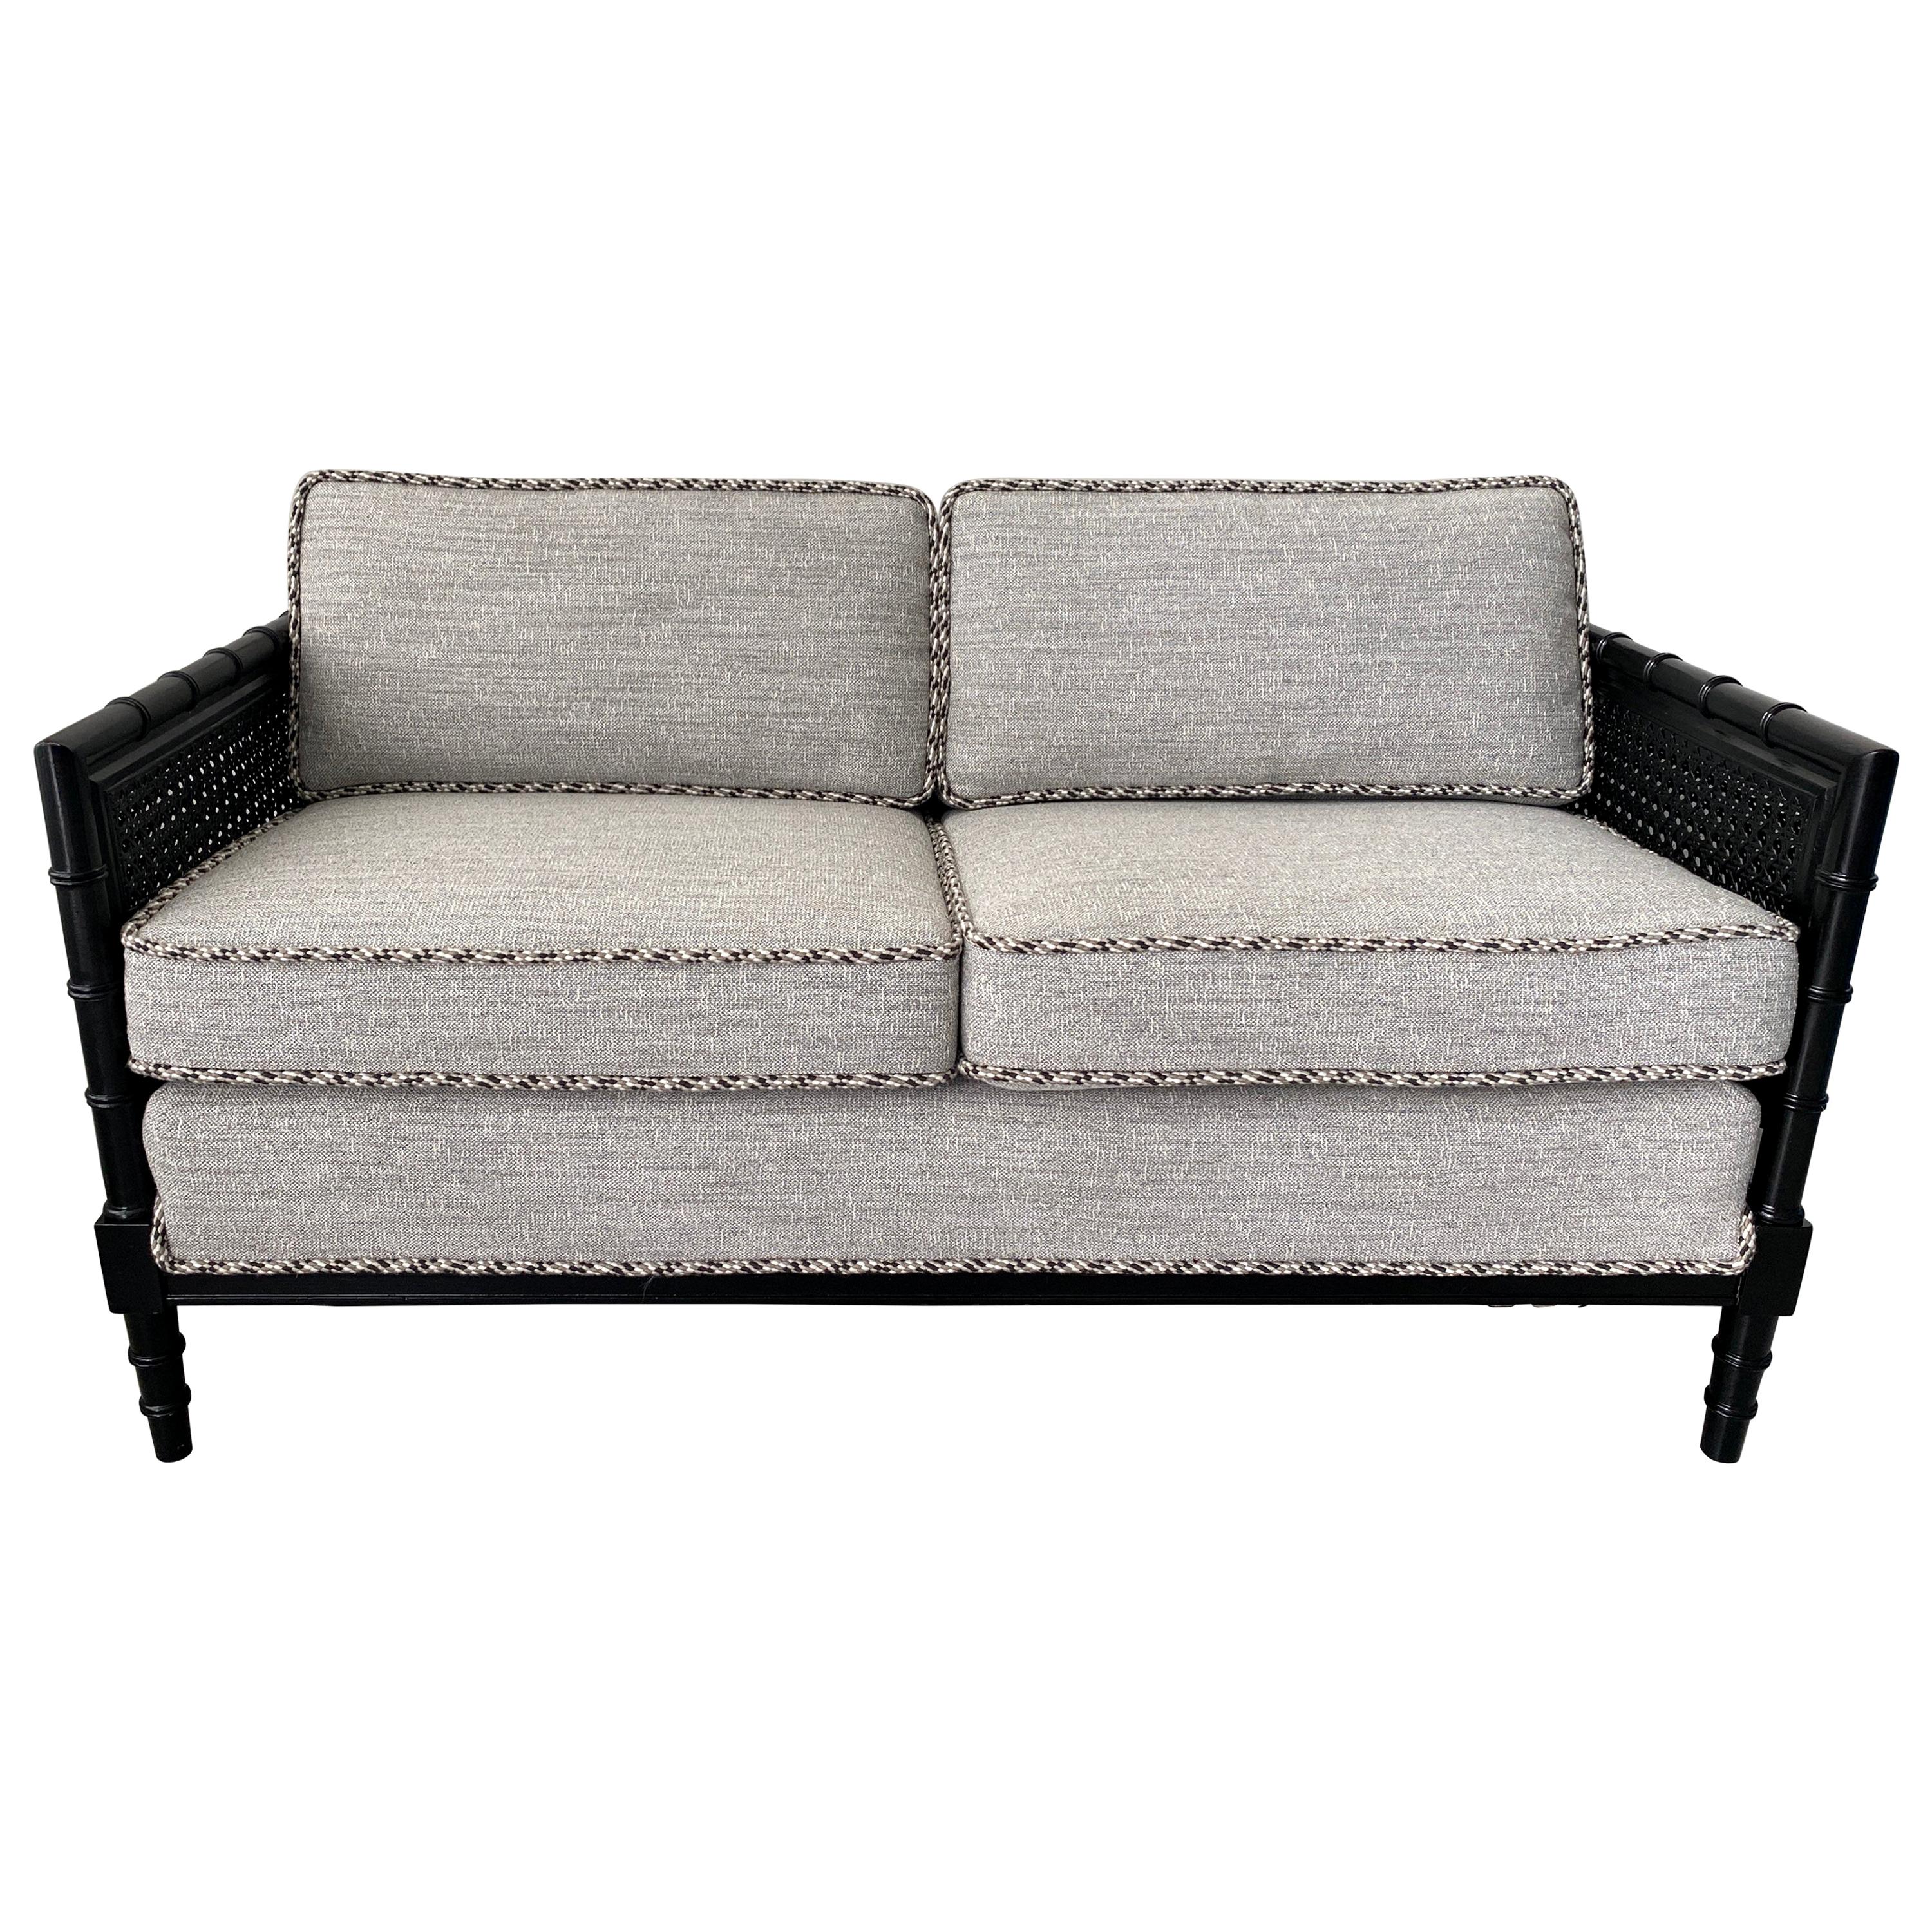 Black Faux Bamboo Settee in Scalamandré Black, White, & Gray Tweed Fabric, 1970s For Sale